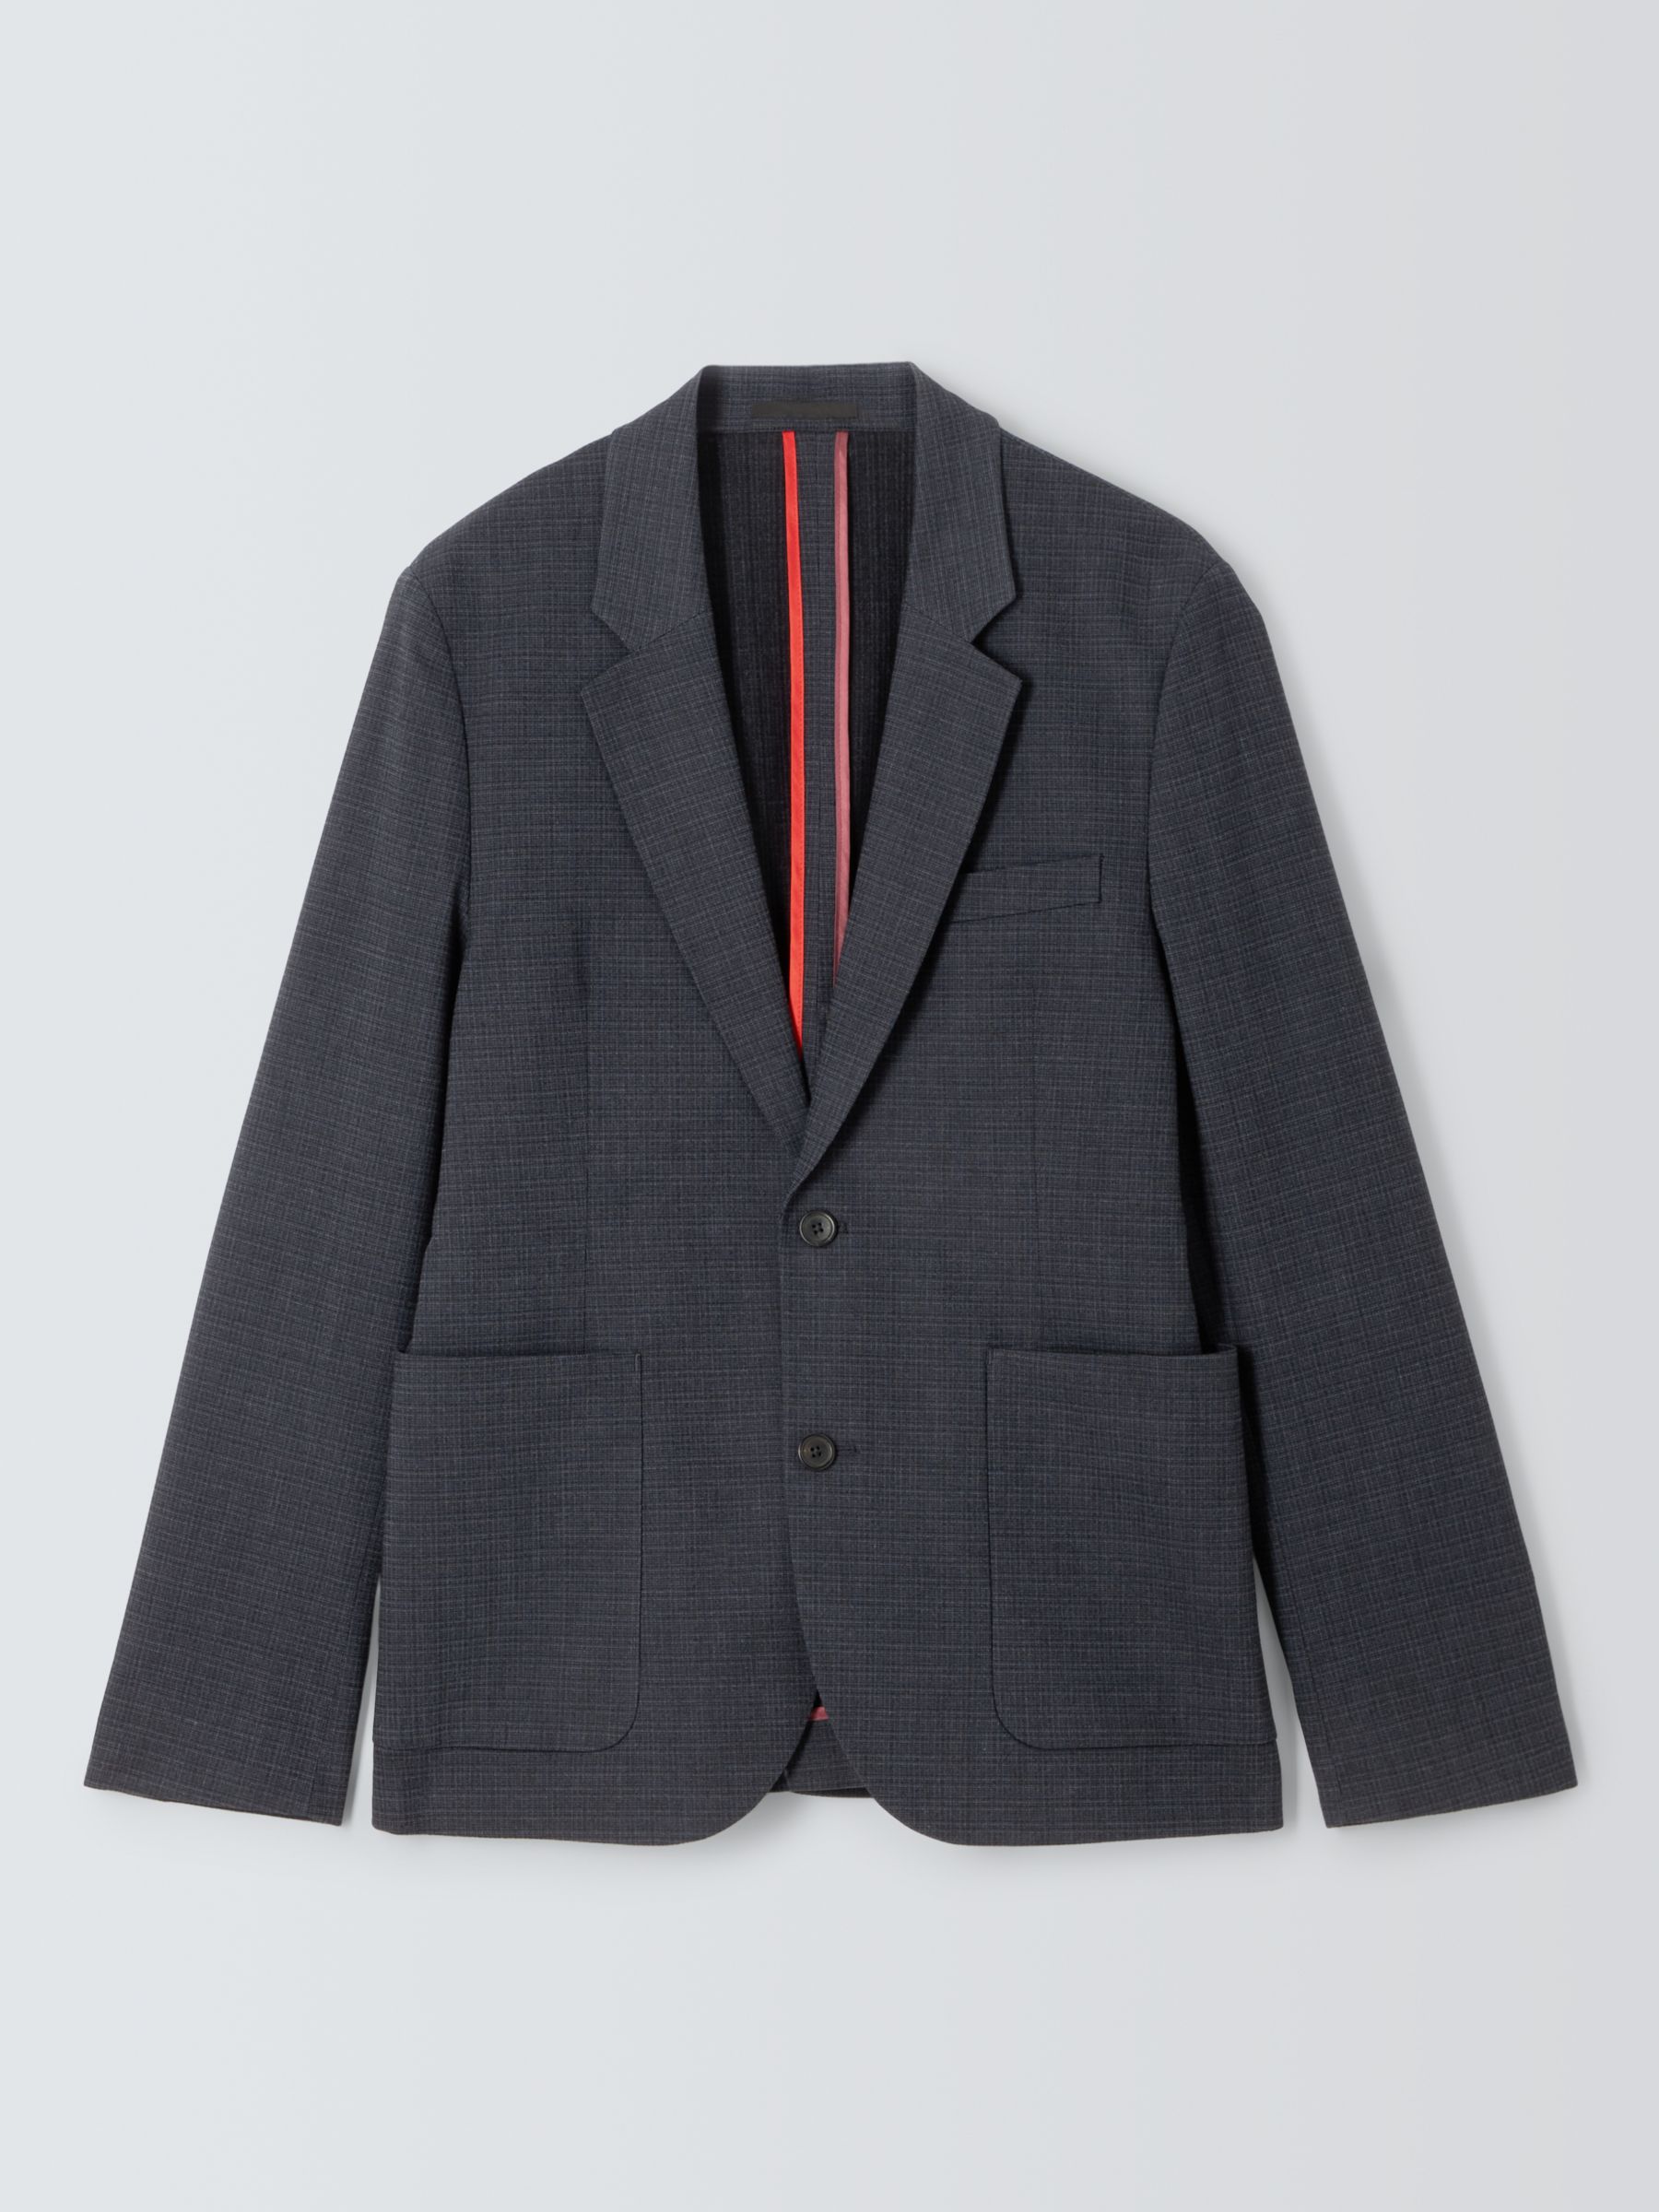 Paul Smith Unlined Textured Suit Jacket, 49 Blues at John Lewis & Partners